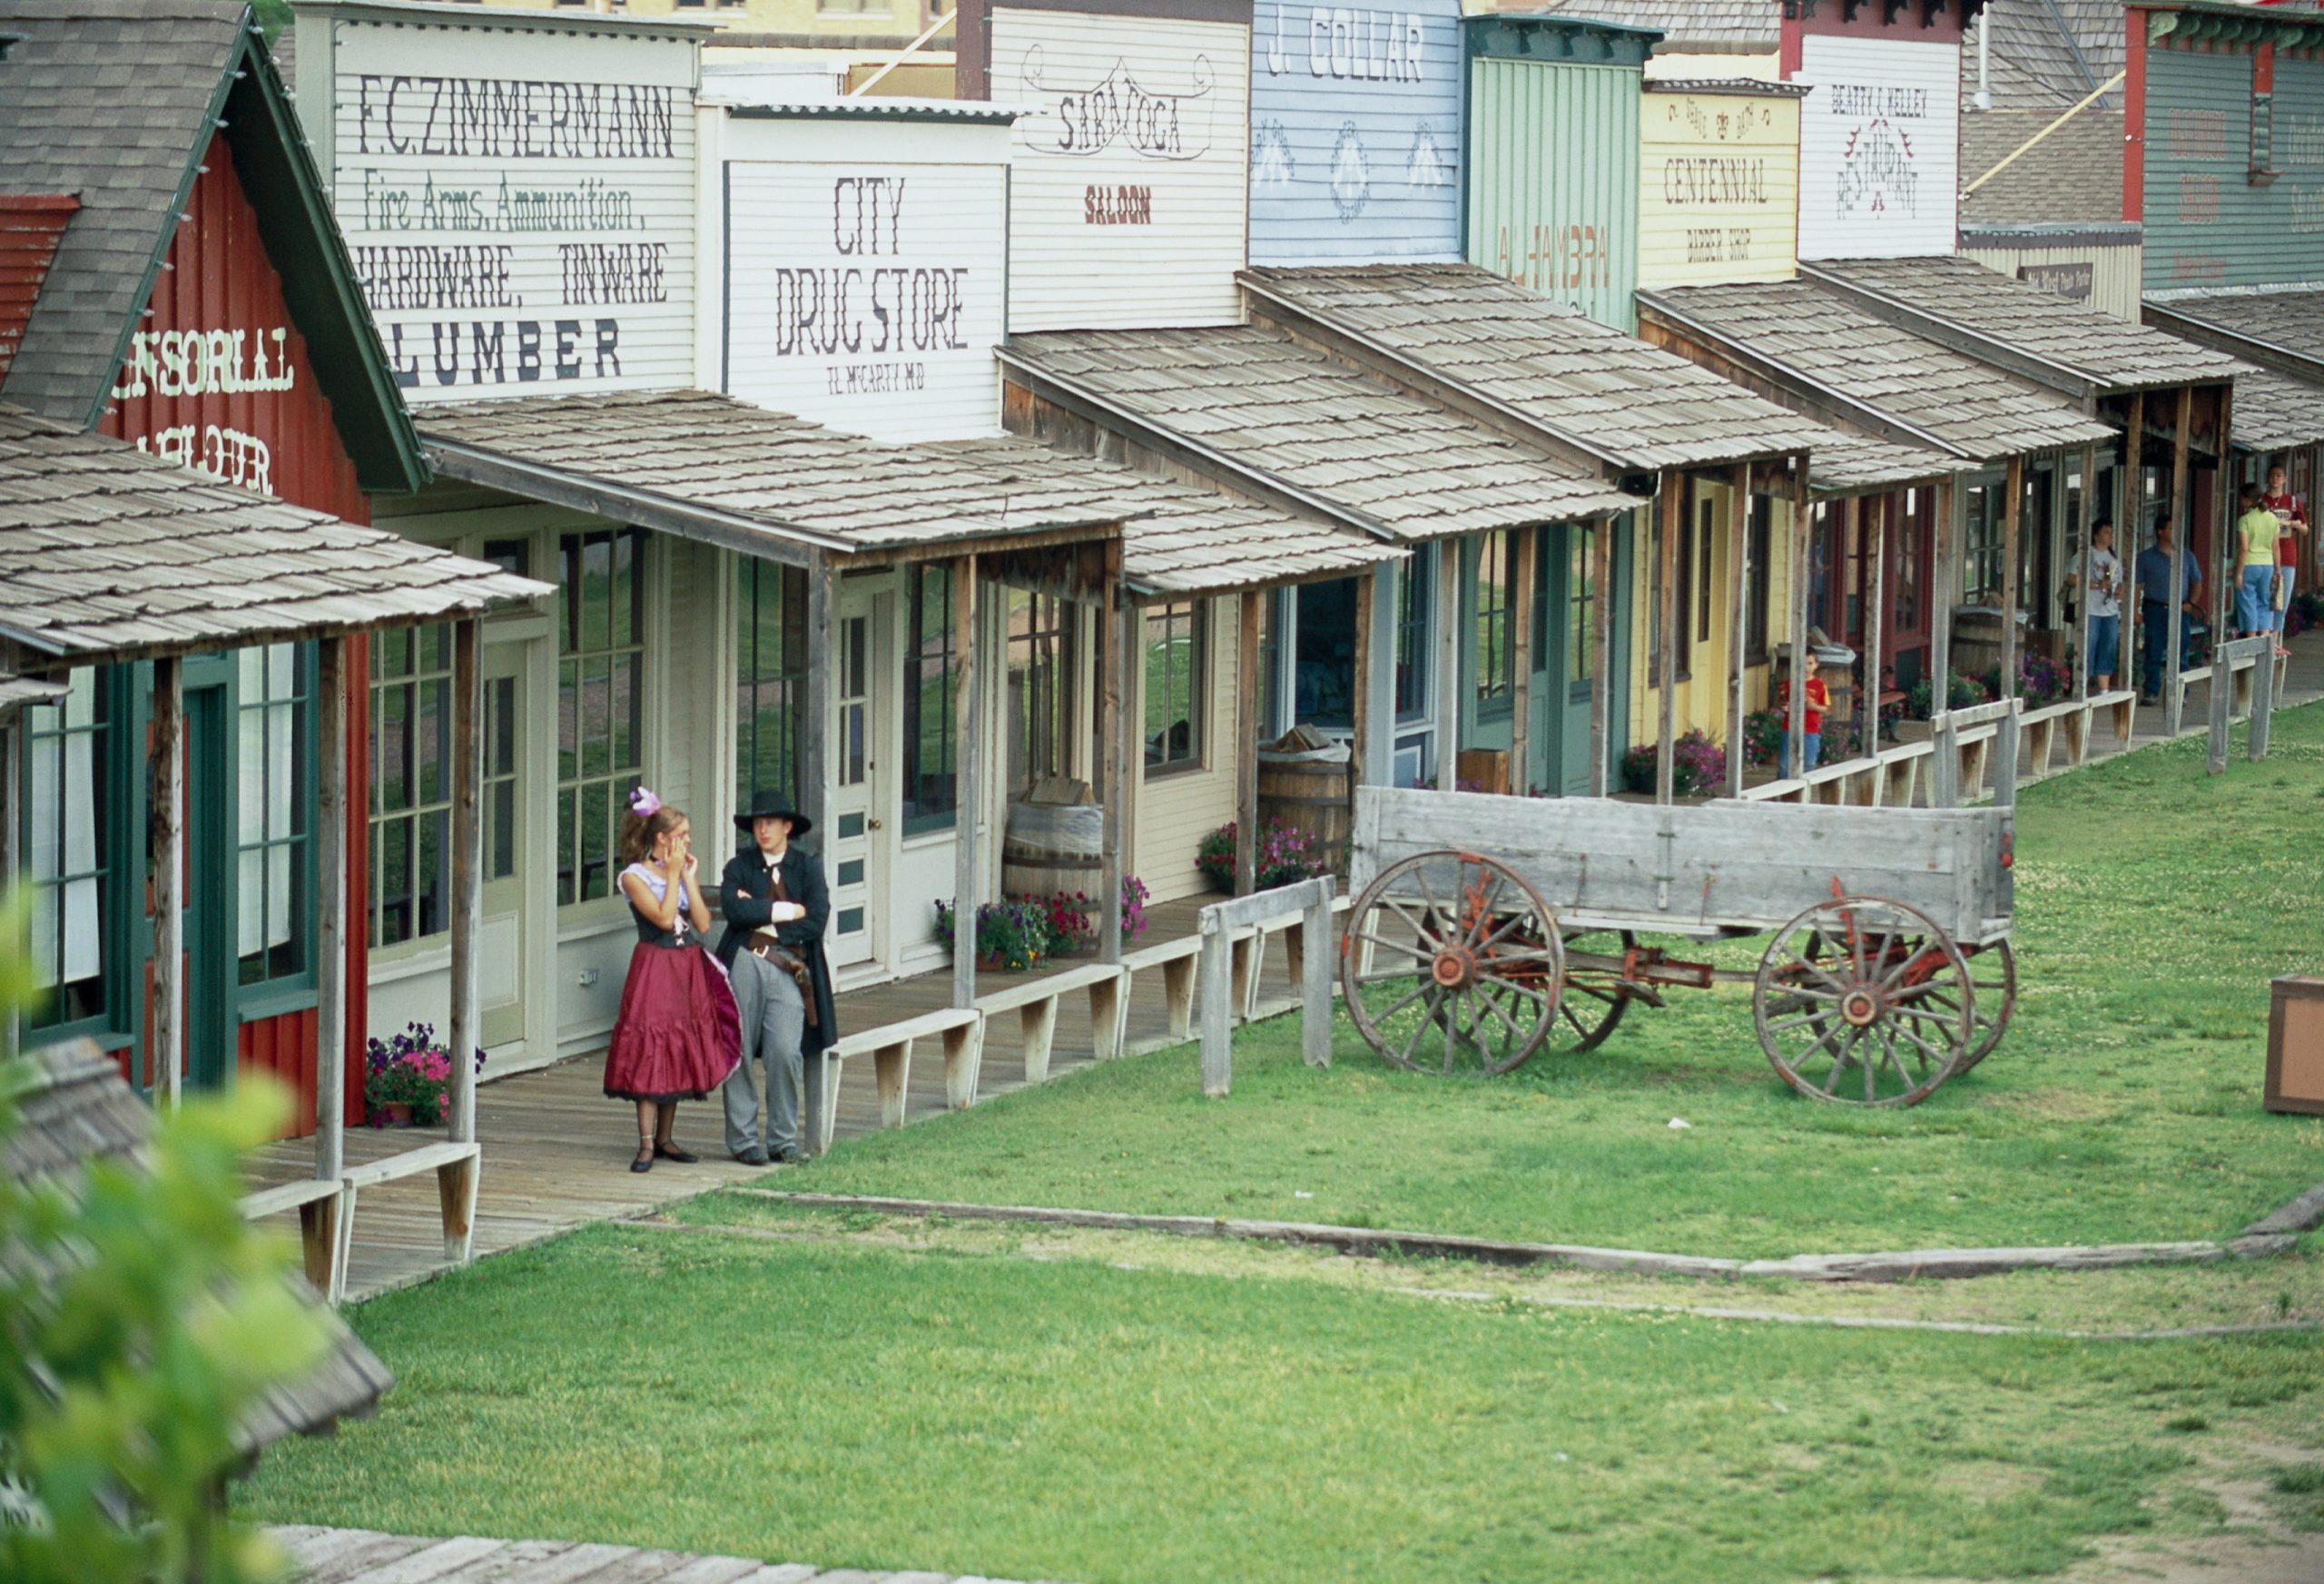 Dodge City celebrates its Old West past -- both real, fictional